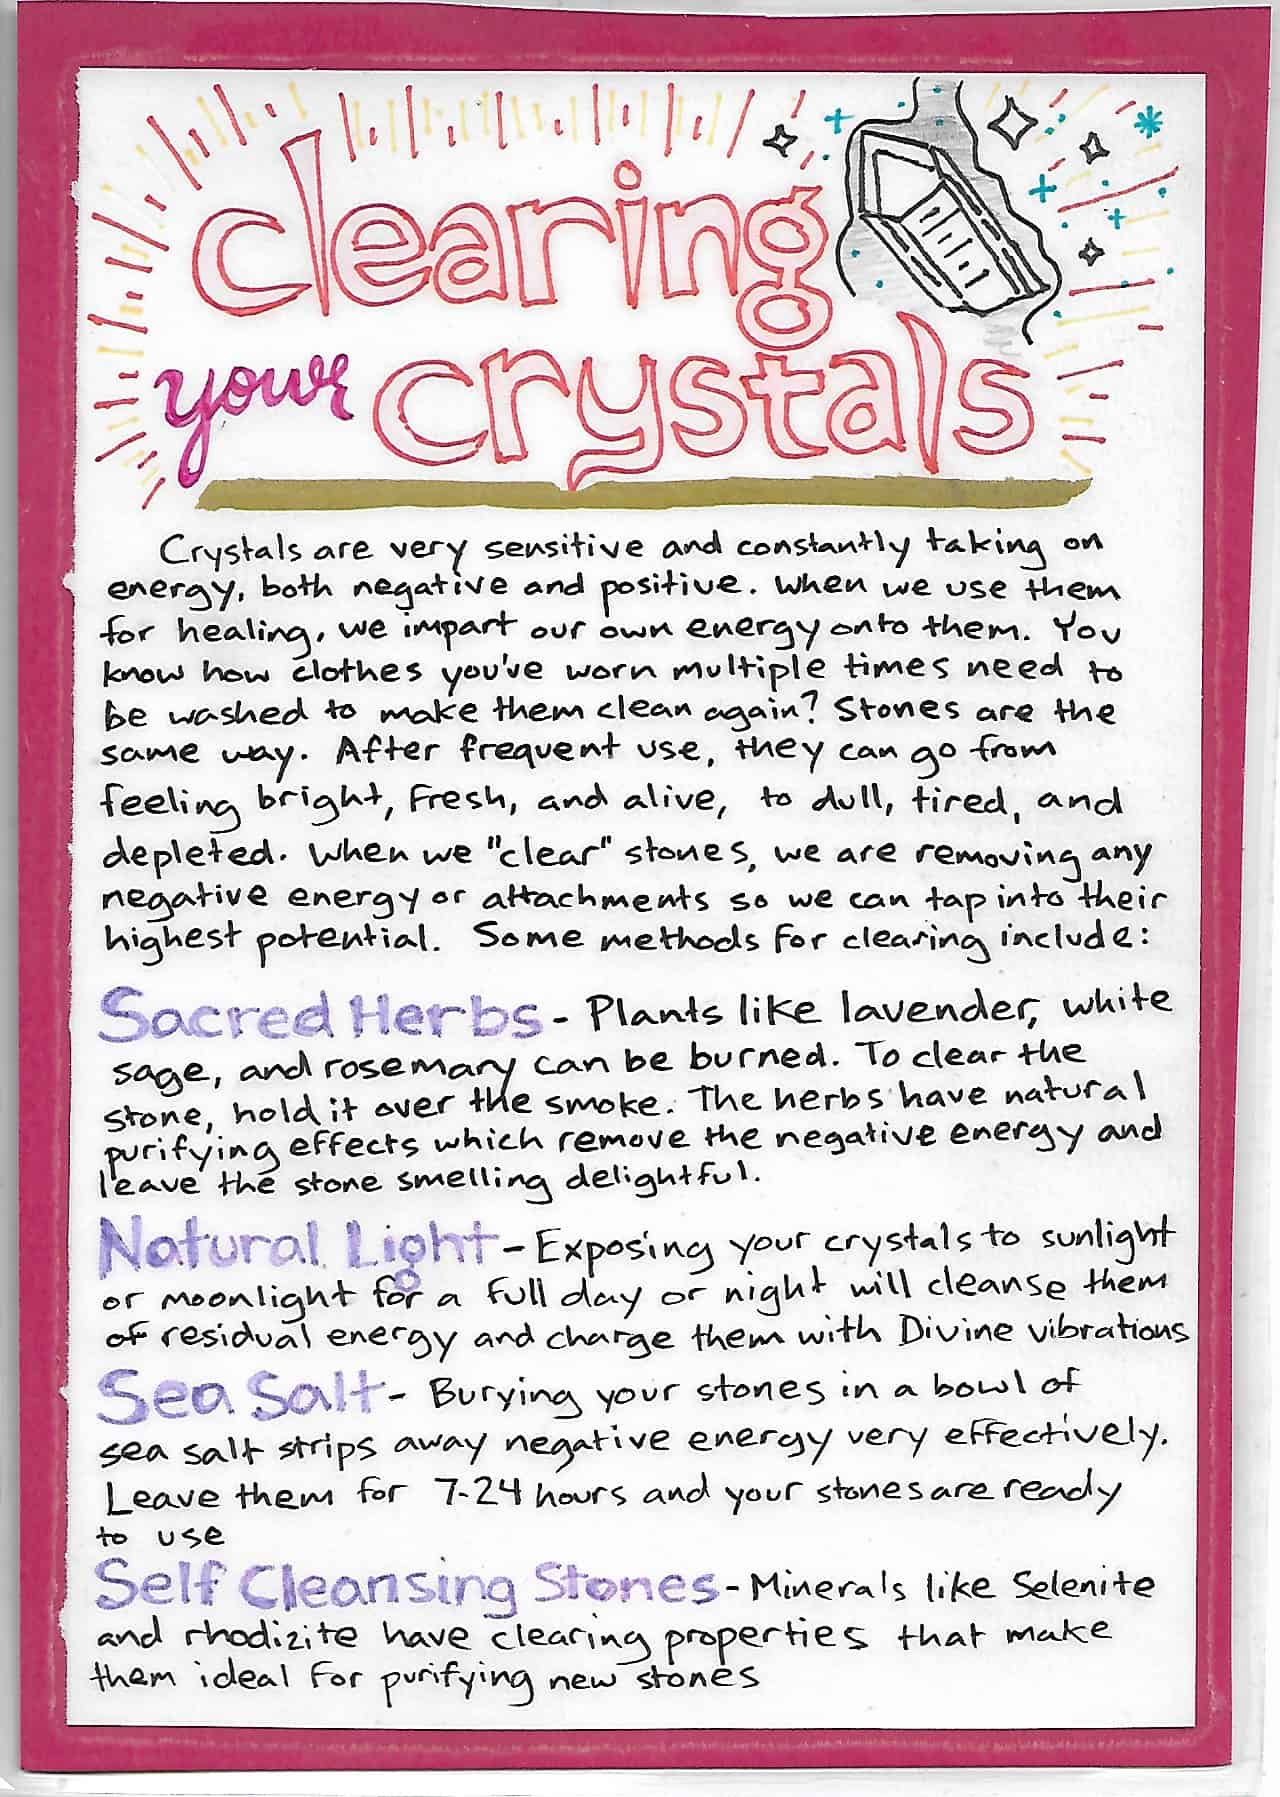 Clearing Your Crystals - Inspirit Crystals